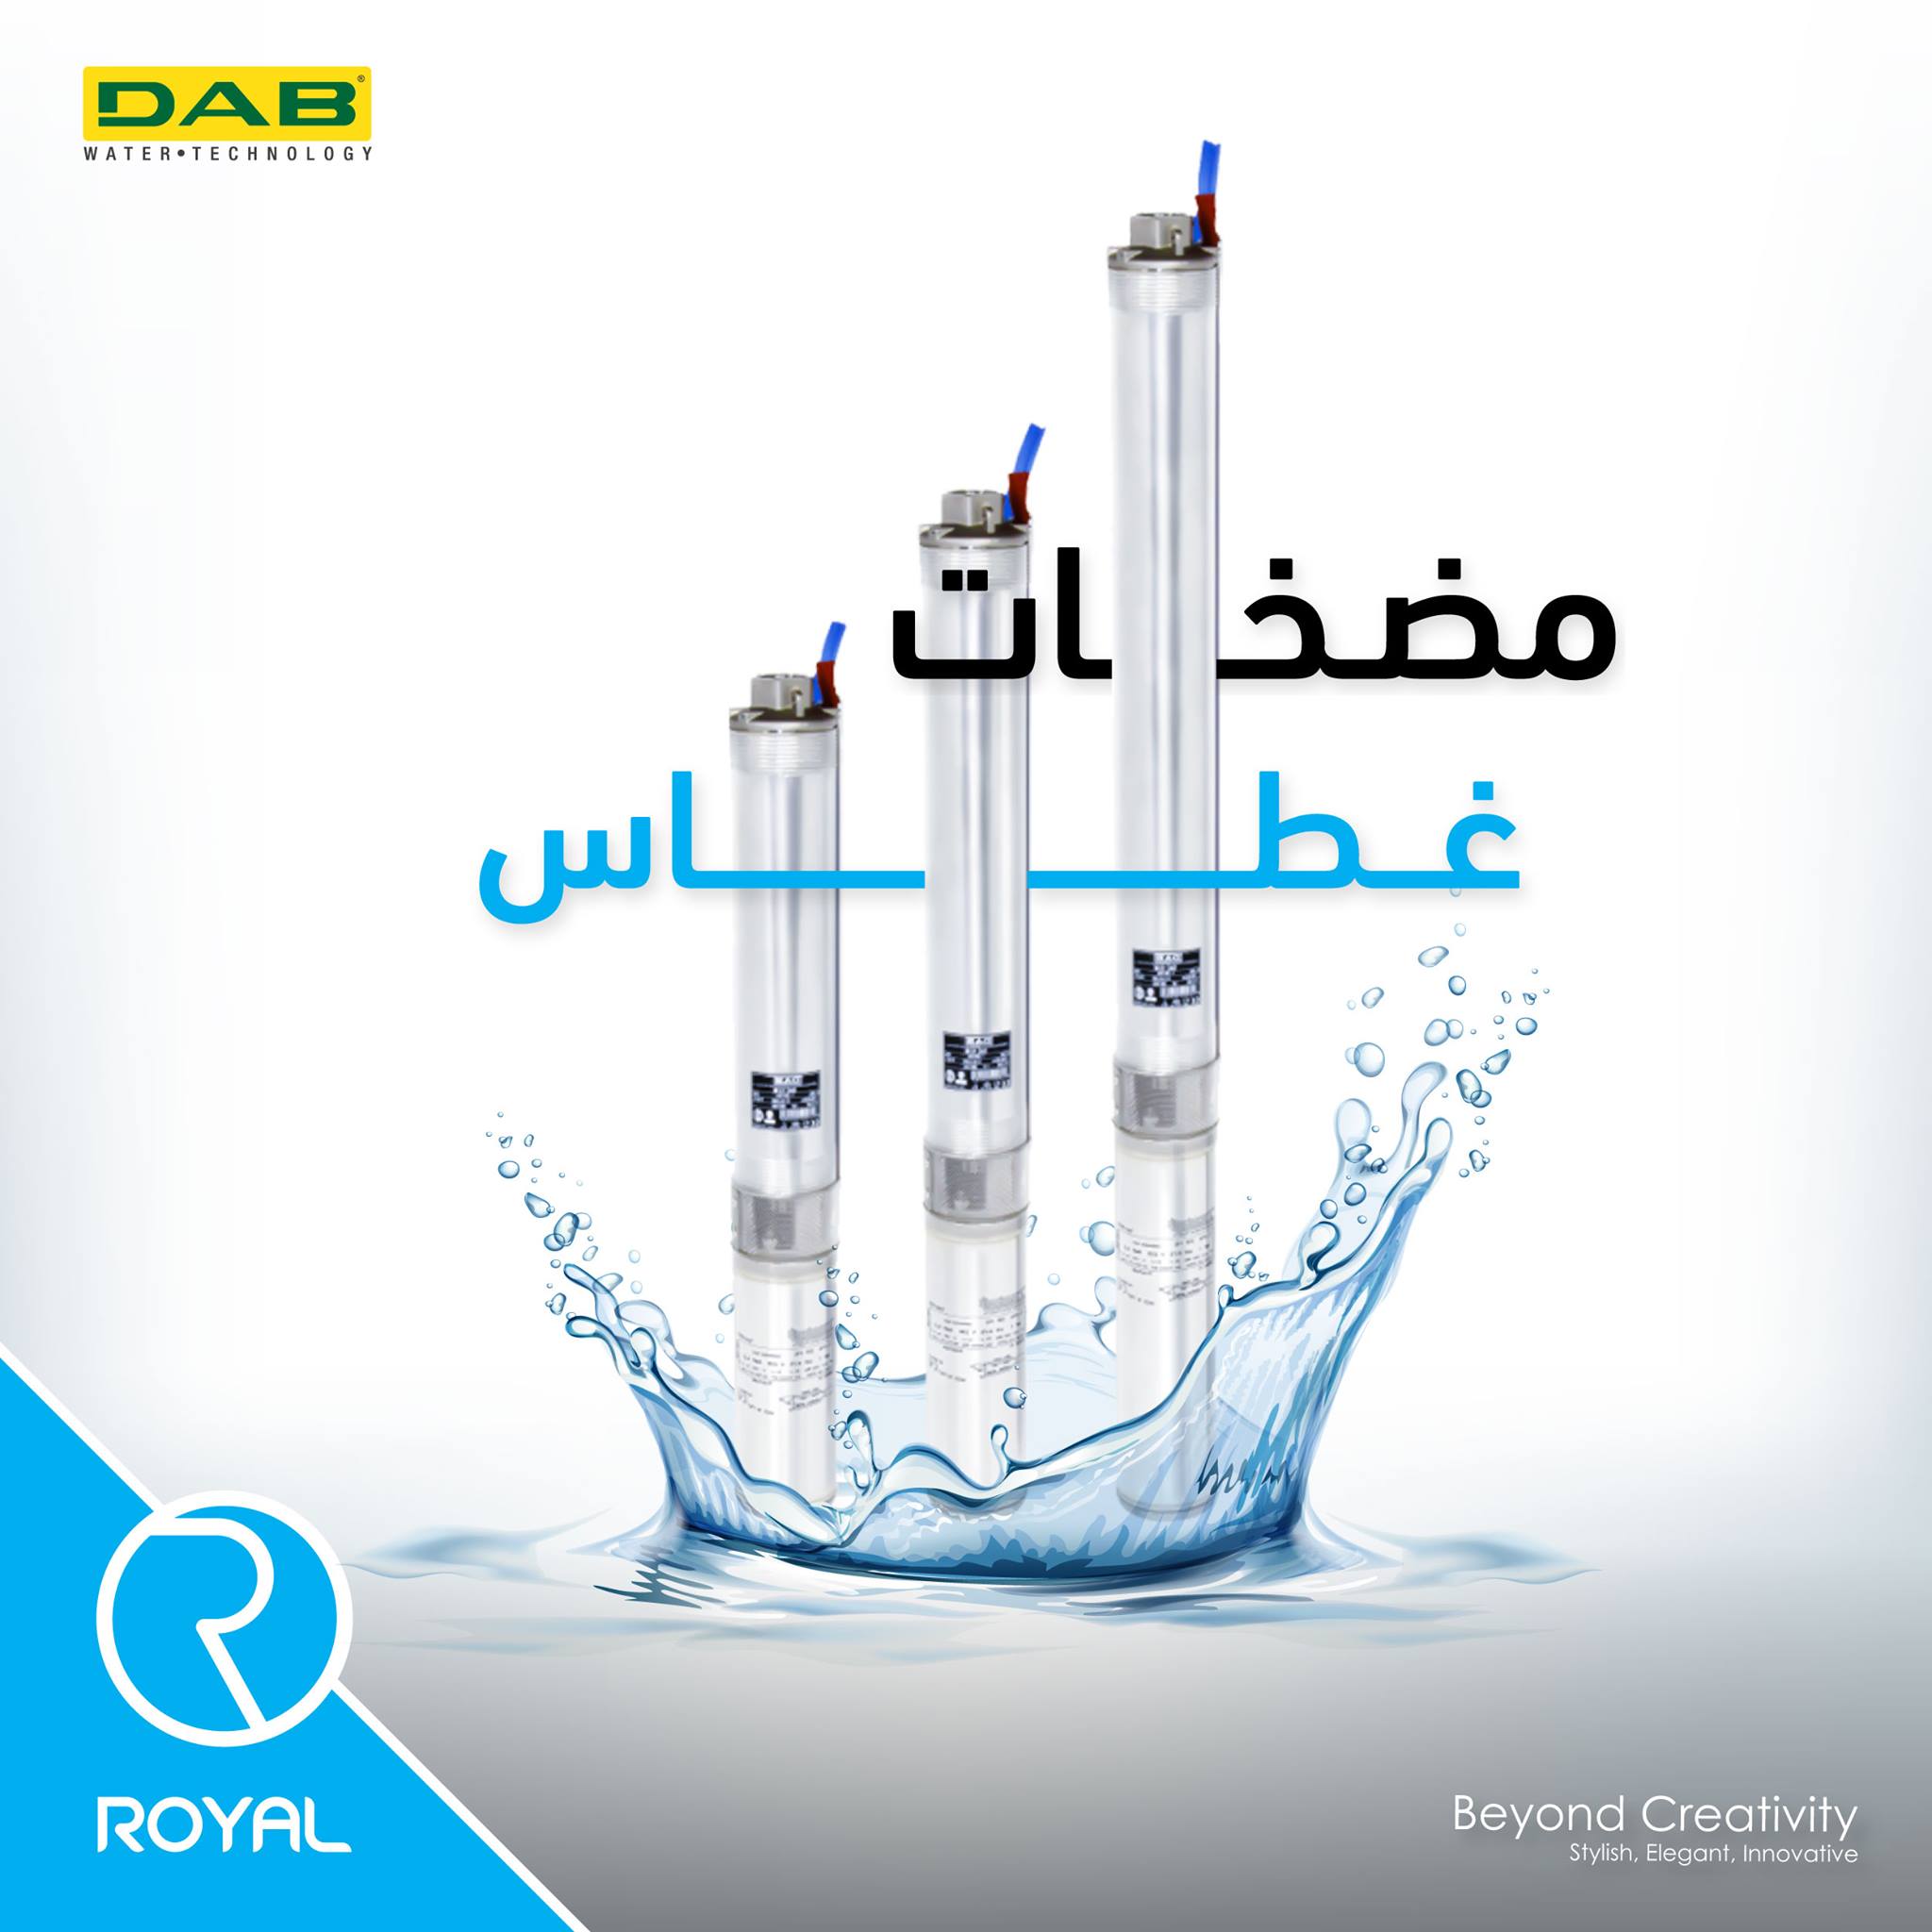 DAB company submersibles of high quality in Royal